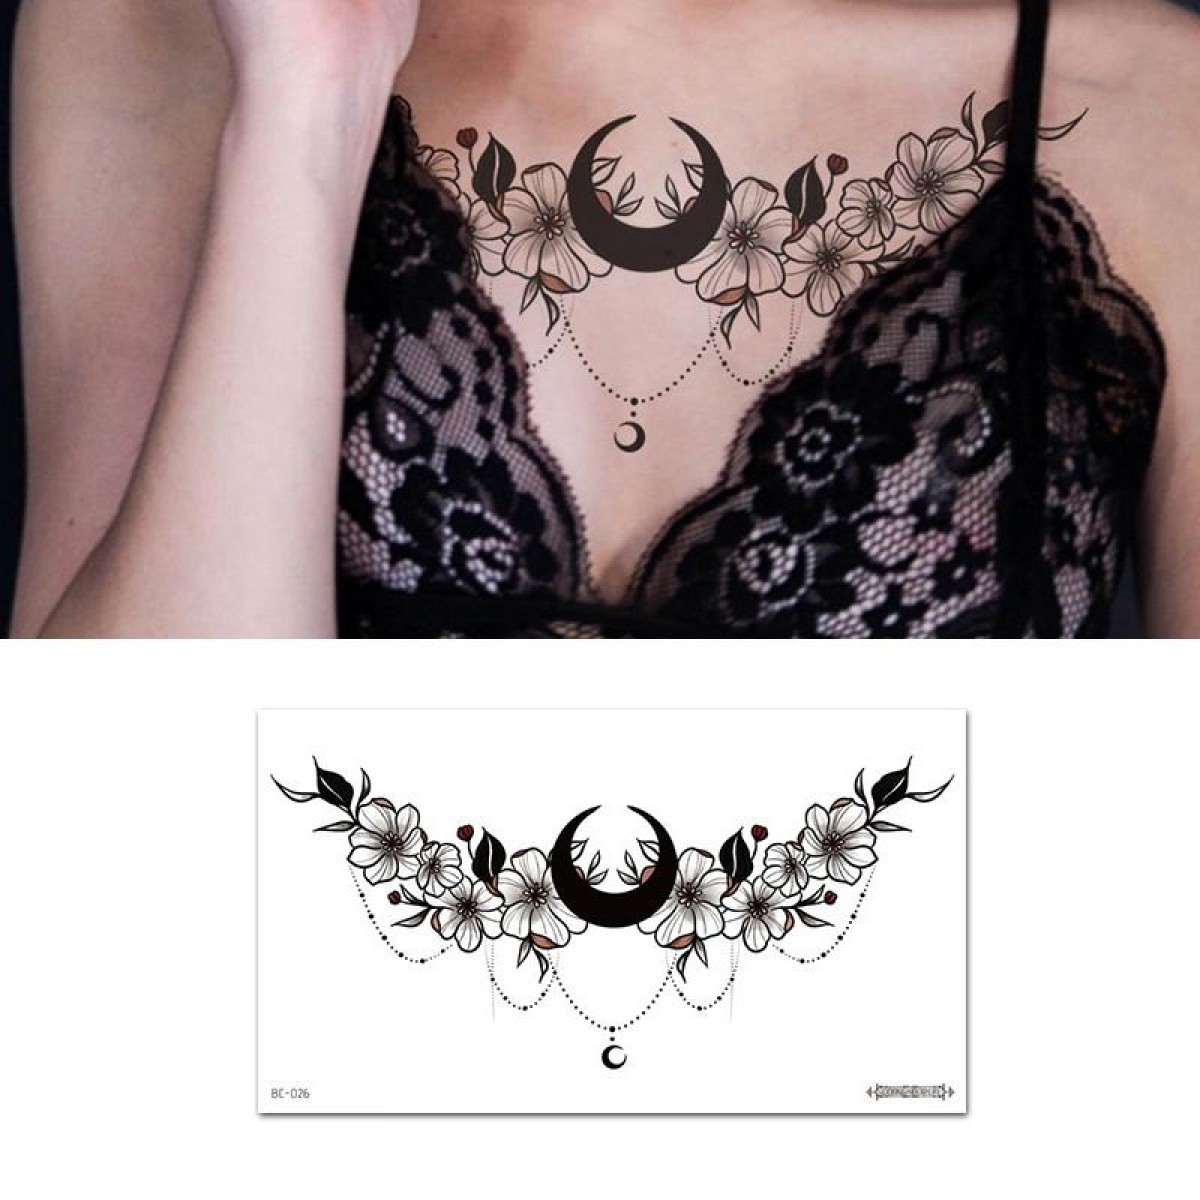 10 PCS Waterproof Tattoo Sticker Clavicle Chest Scar Covering Sticker(BC-026)